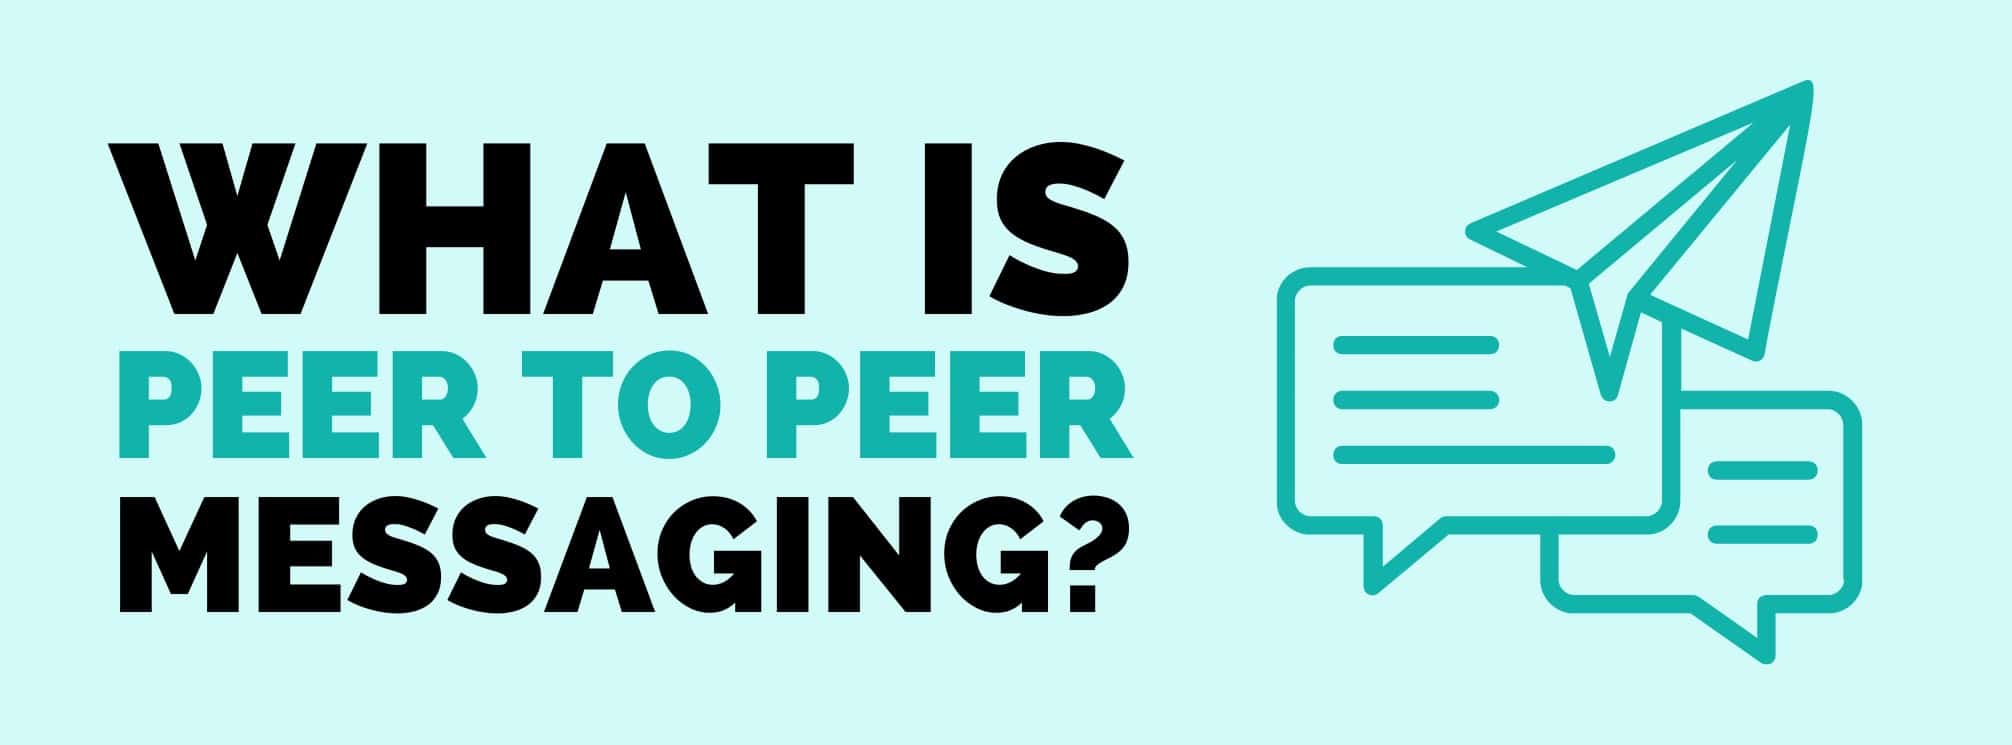 graphic that says what is peer to peer messaging with an icon of two text bubbles and a paper plane